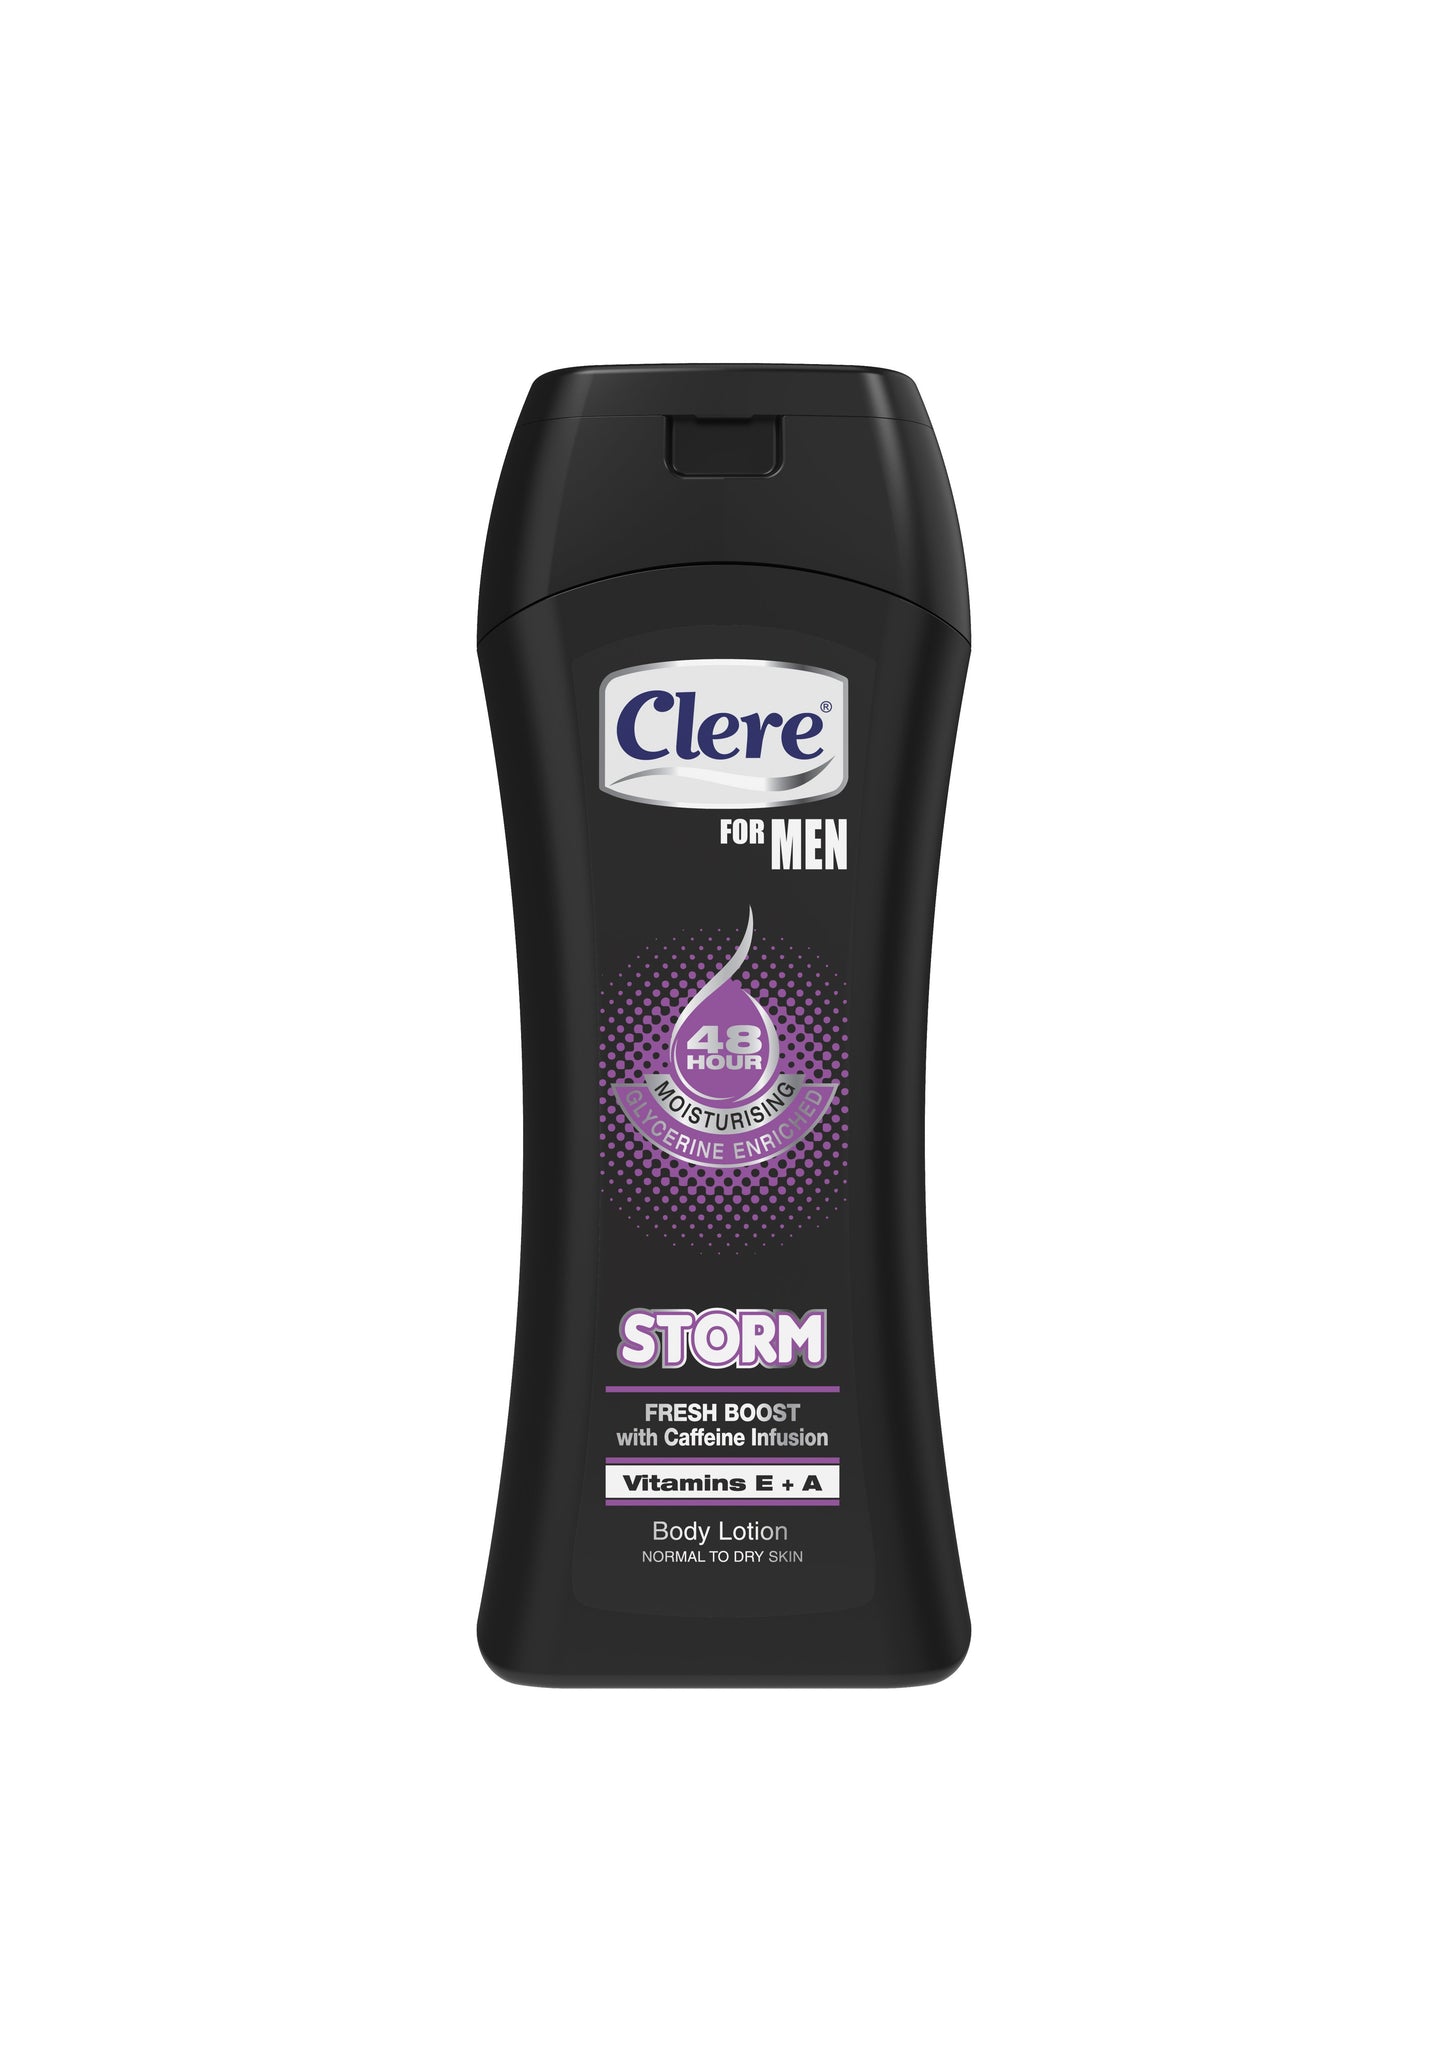 Clere For Men Body Lotion - STORM - 200ml